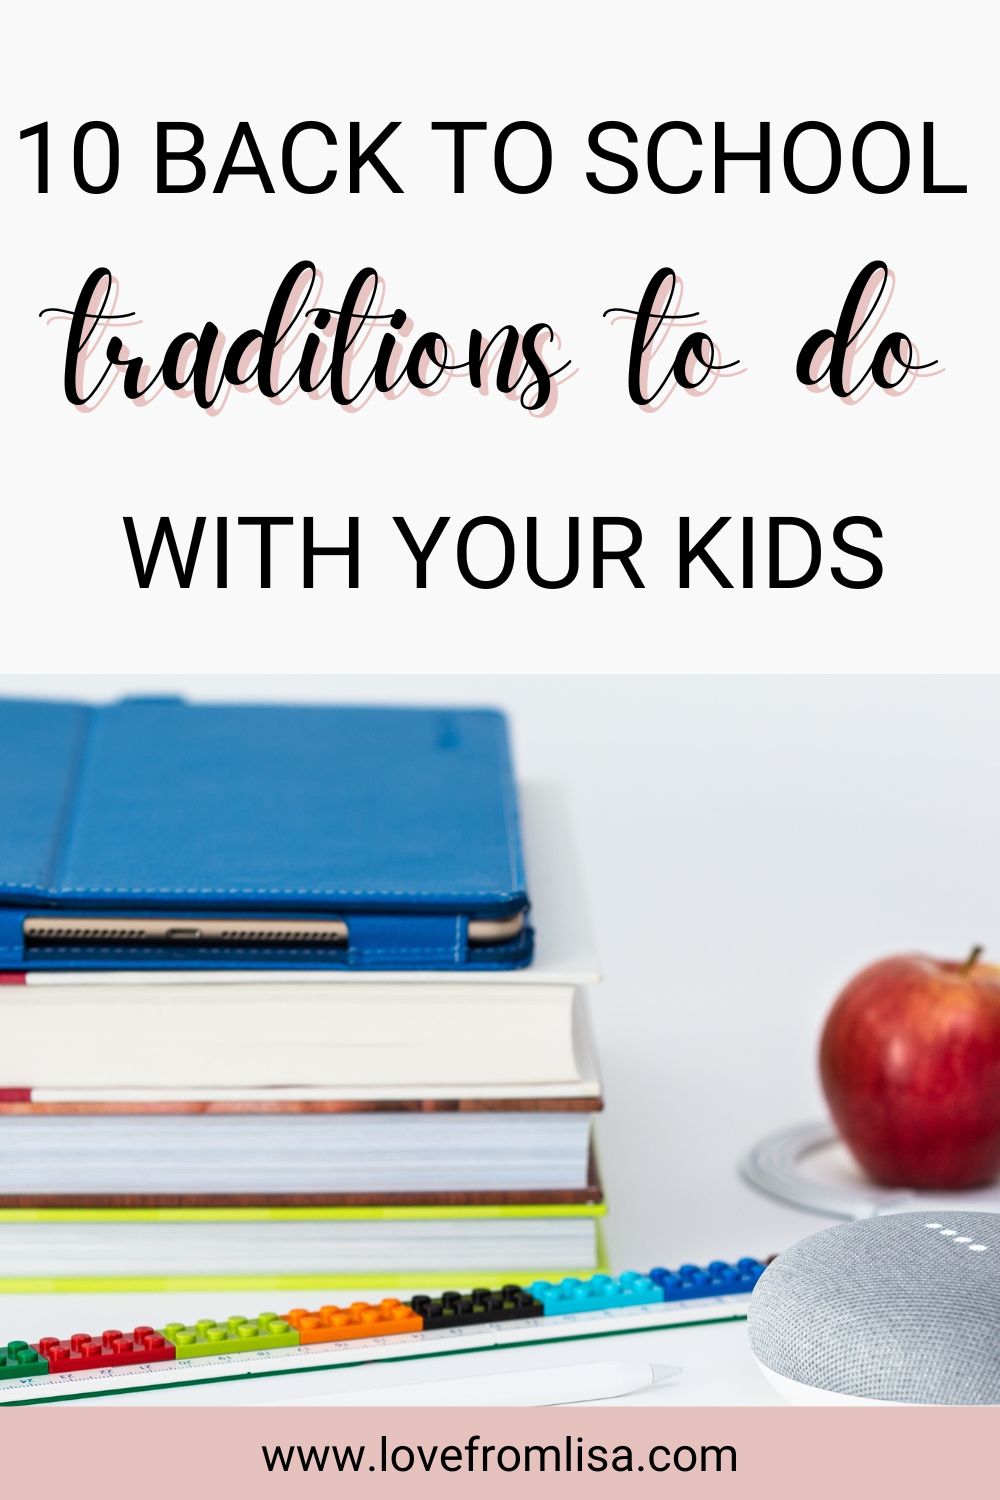 10 back to school traditions to do with your kids